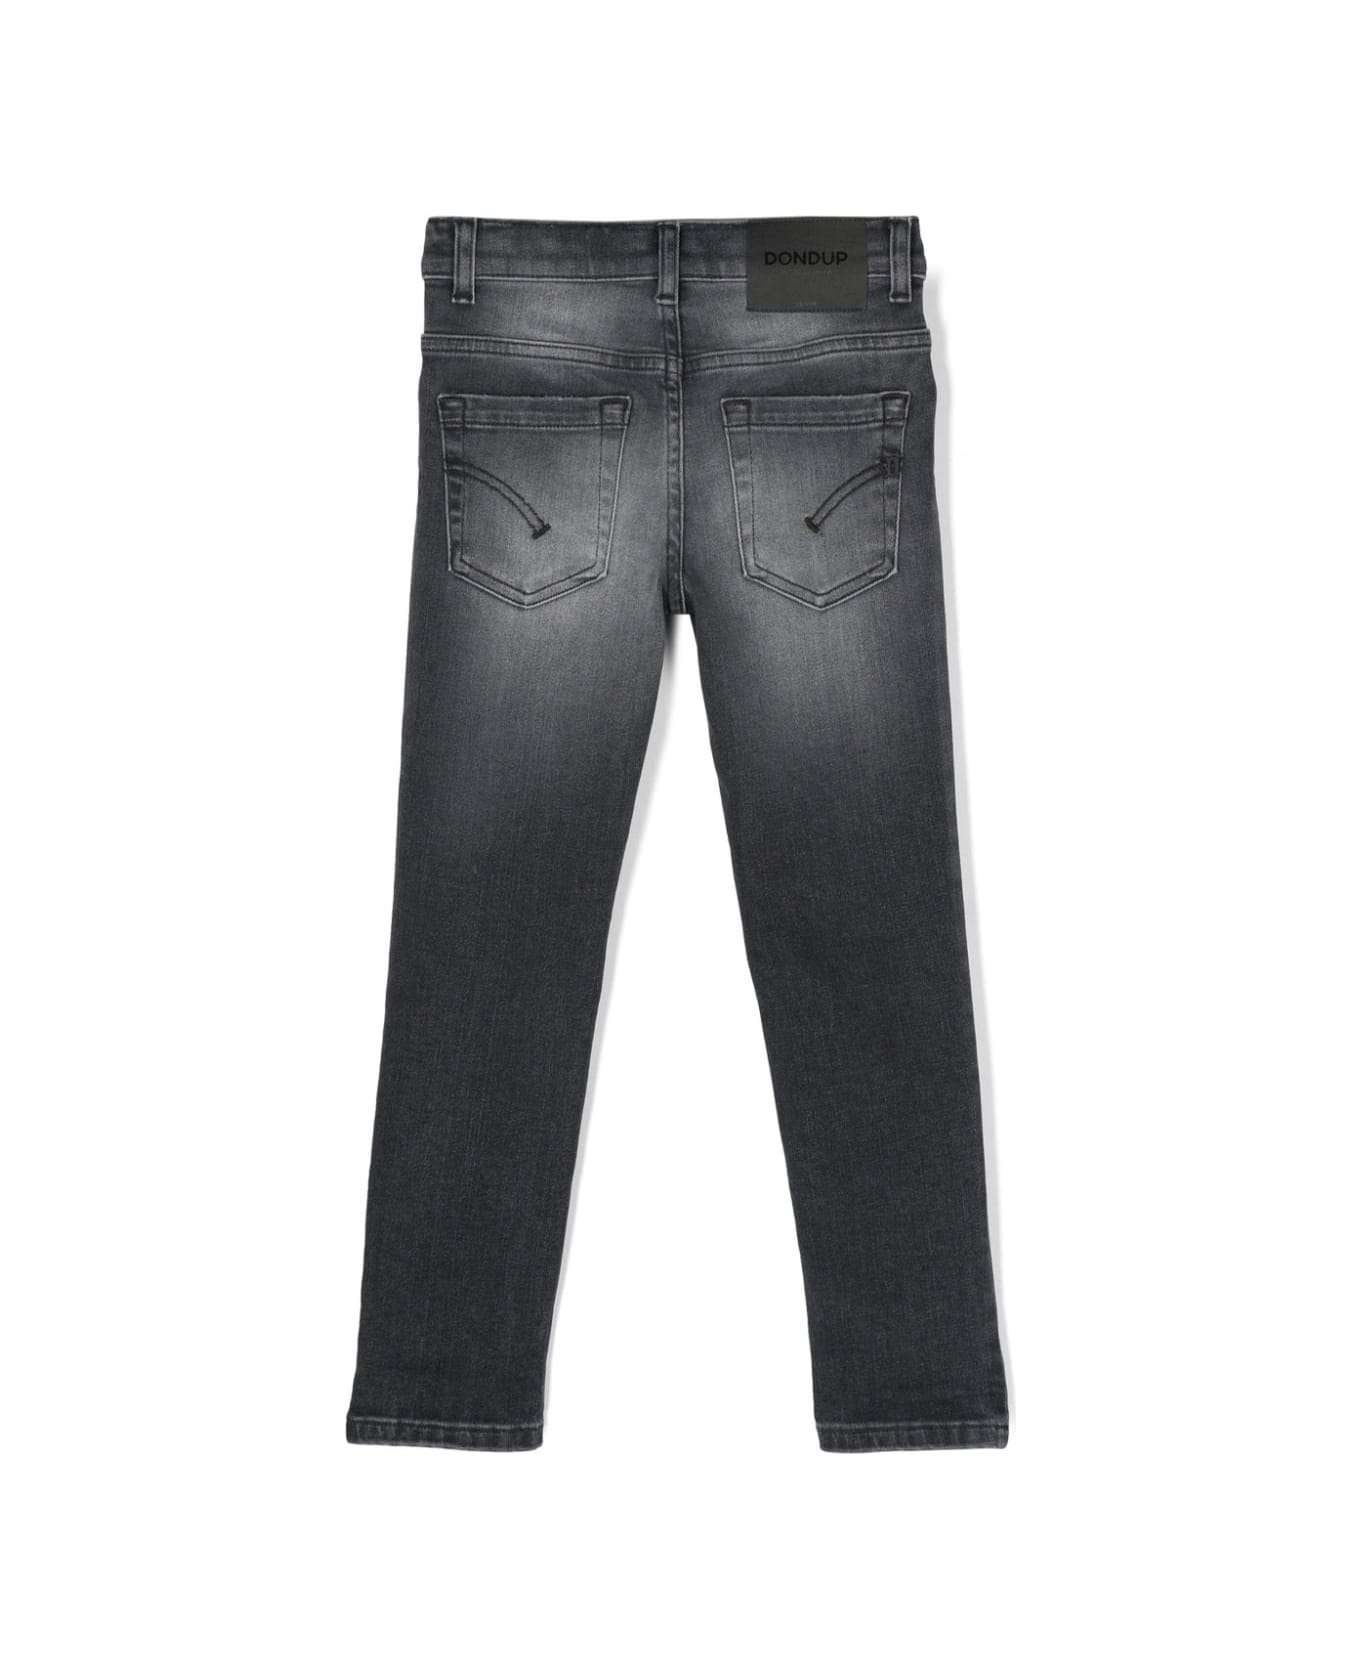 Dondup Black George Jeans With Abrasions - Grey ボトムス